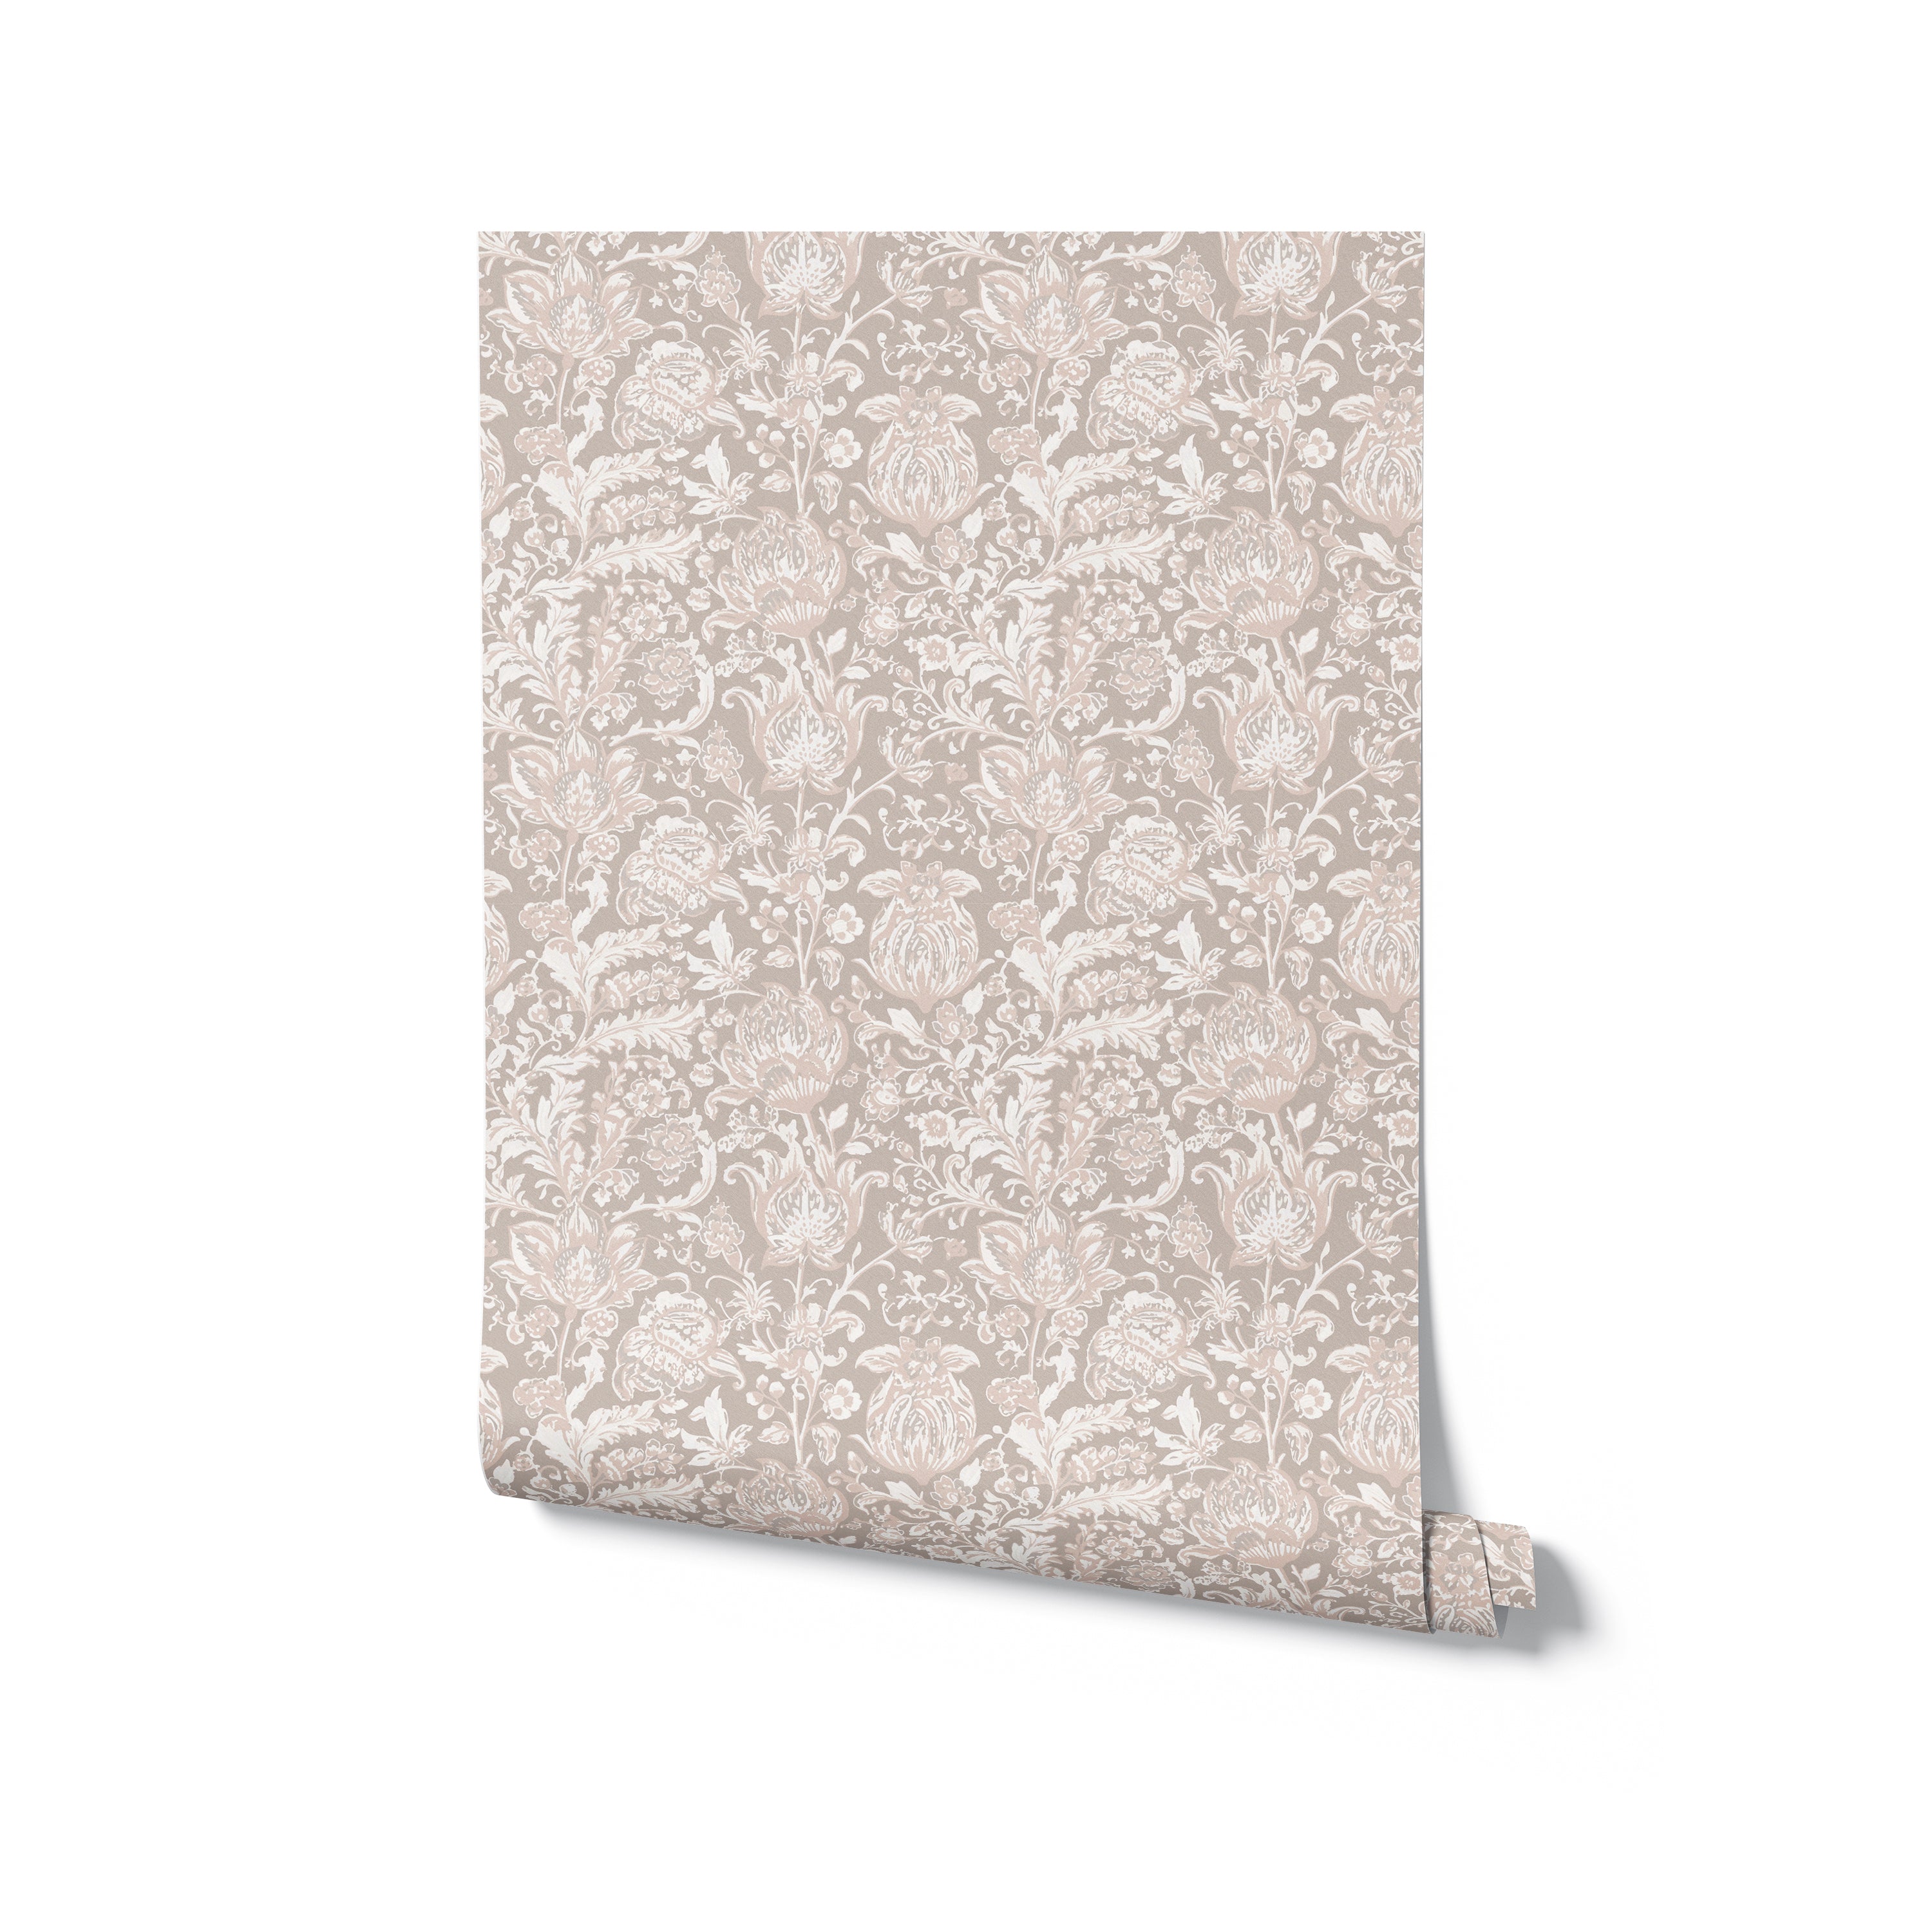 A roll of Marseilles Wallpaper displaying its intricate floral pattern in lavender grey. The wallpaper is neatly rolled, highlighting the detailed and refined design, perfect for adding a touch of elegance to any room.